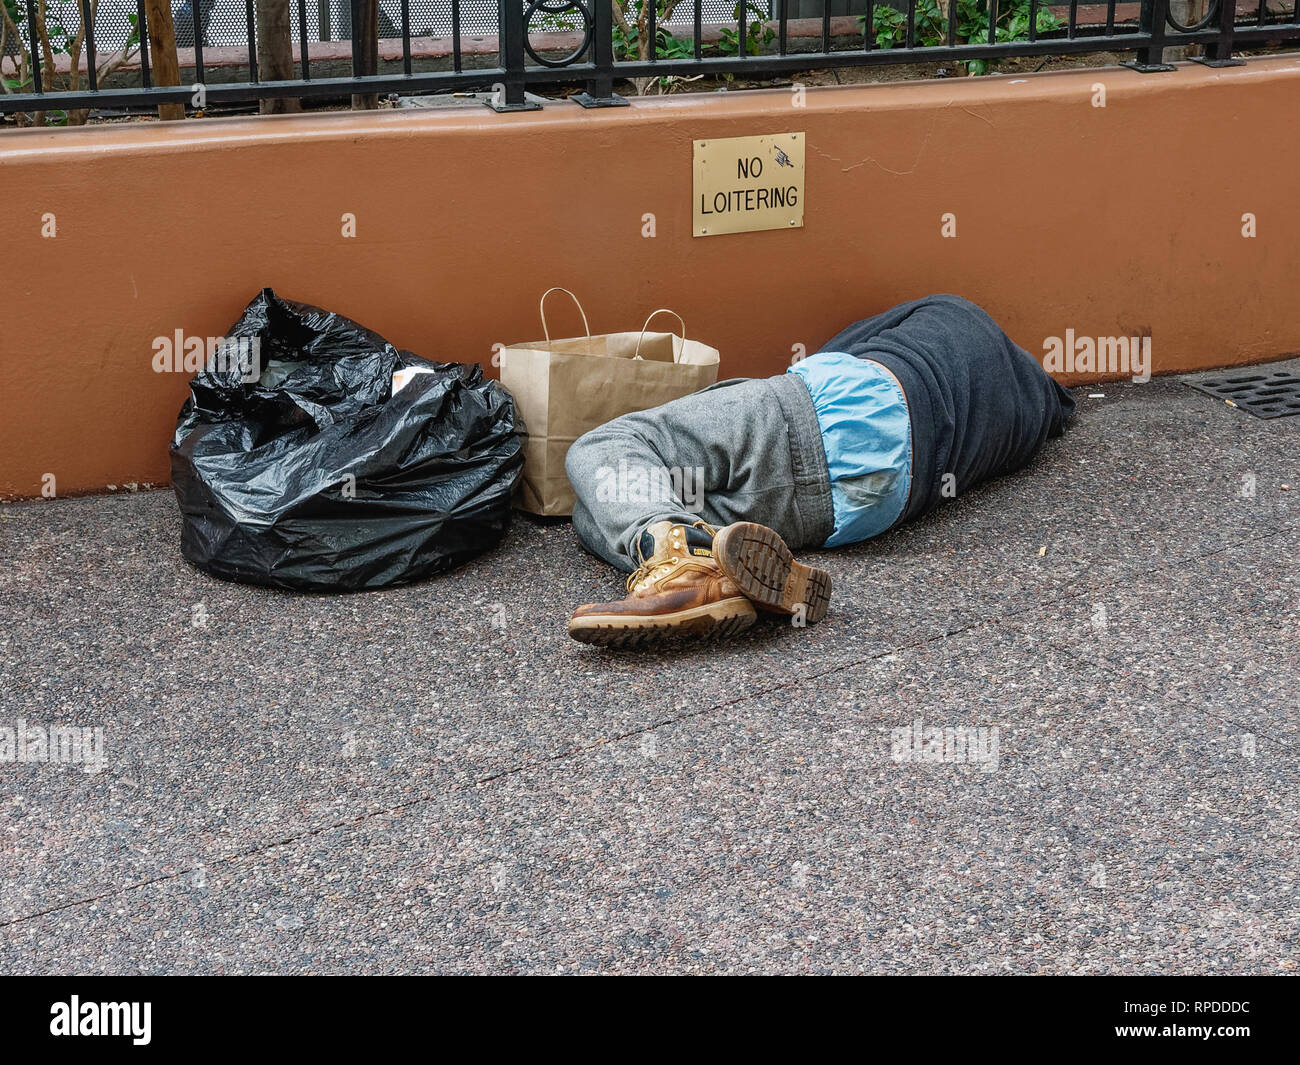 Las Vegas, Nevada -  November 21, 2016: Homeless person is sleeping on 'the strip' in front of a 'No Loitering' sign. Stock Photo